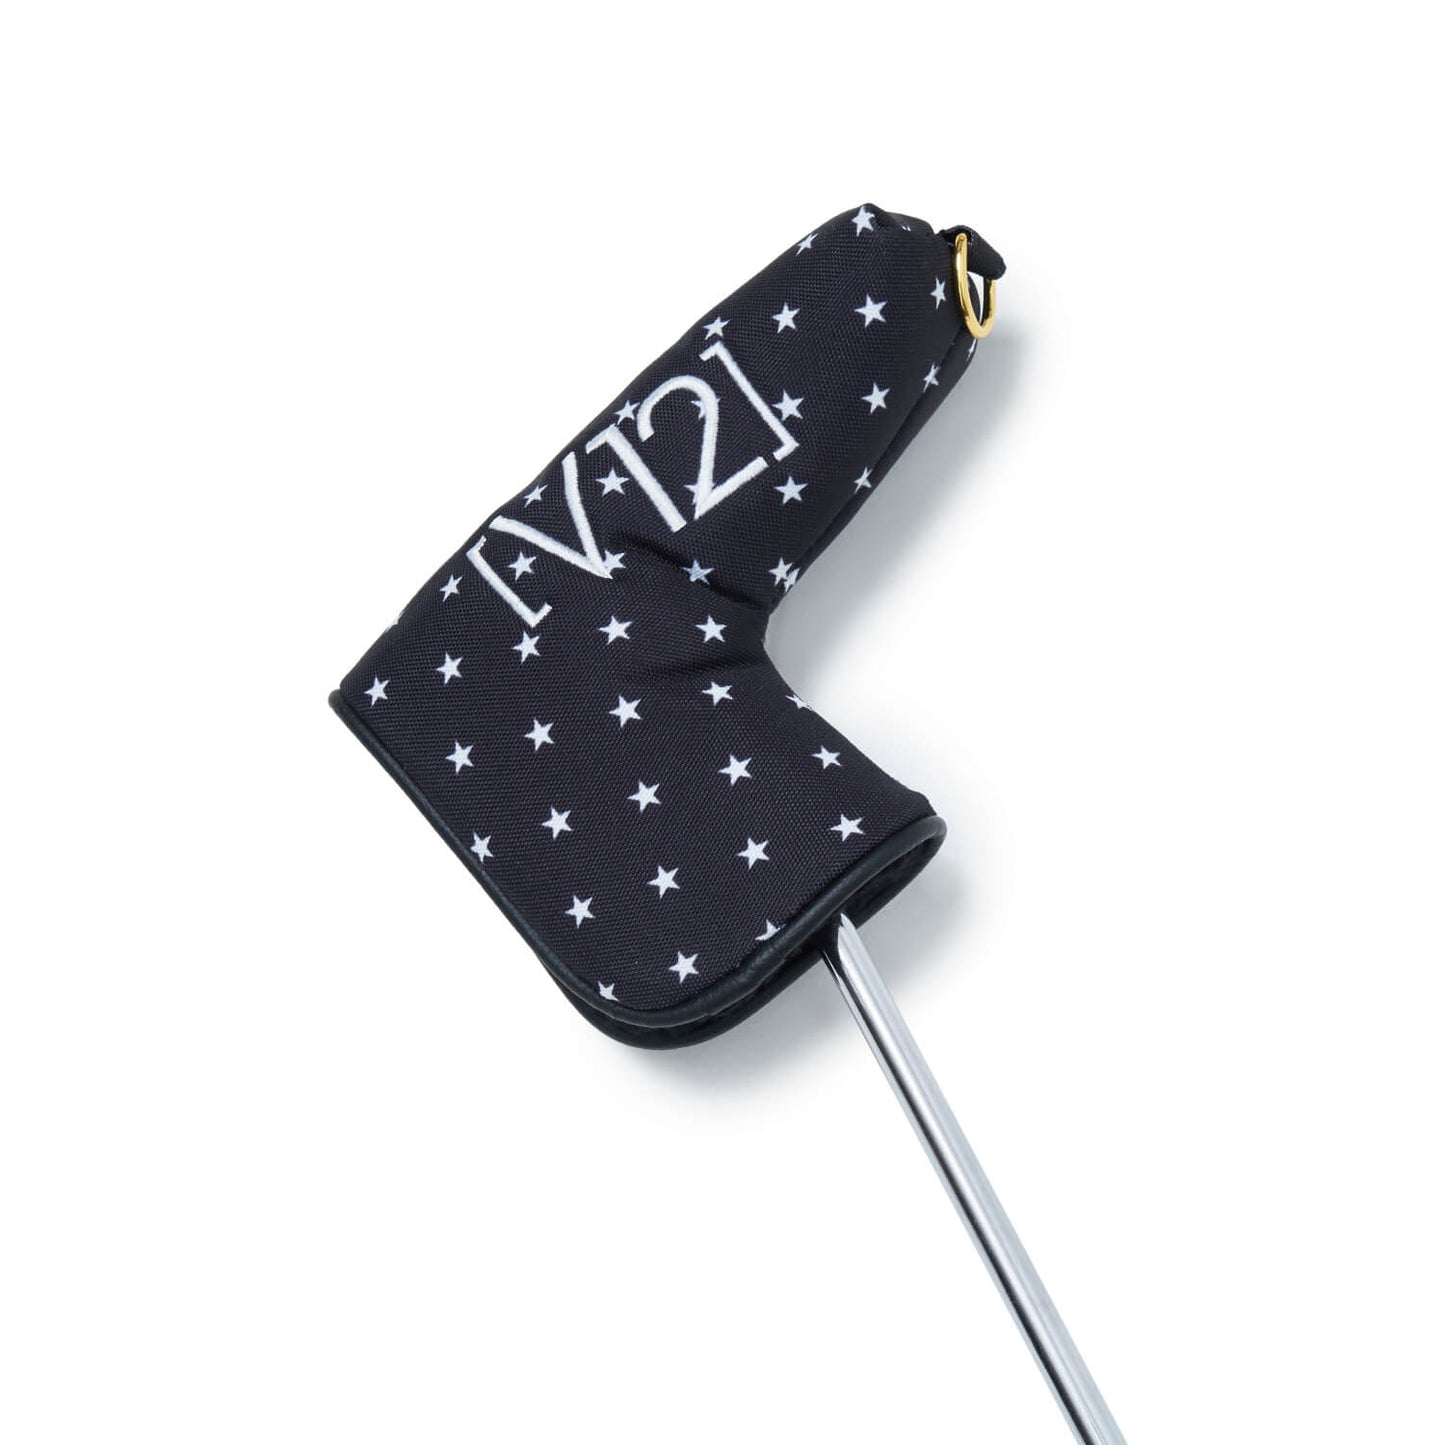 STAR PUTTER(PING)